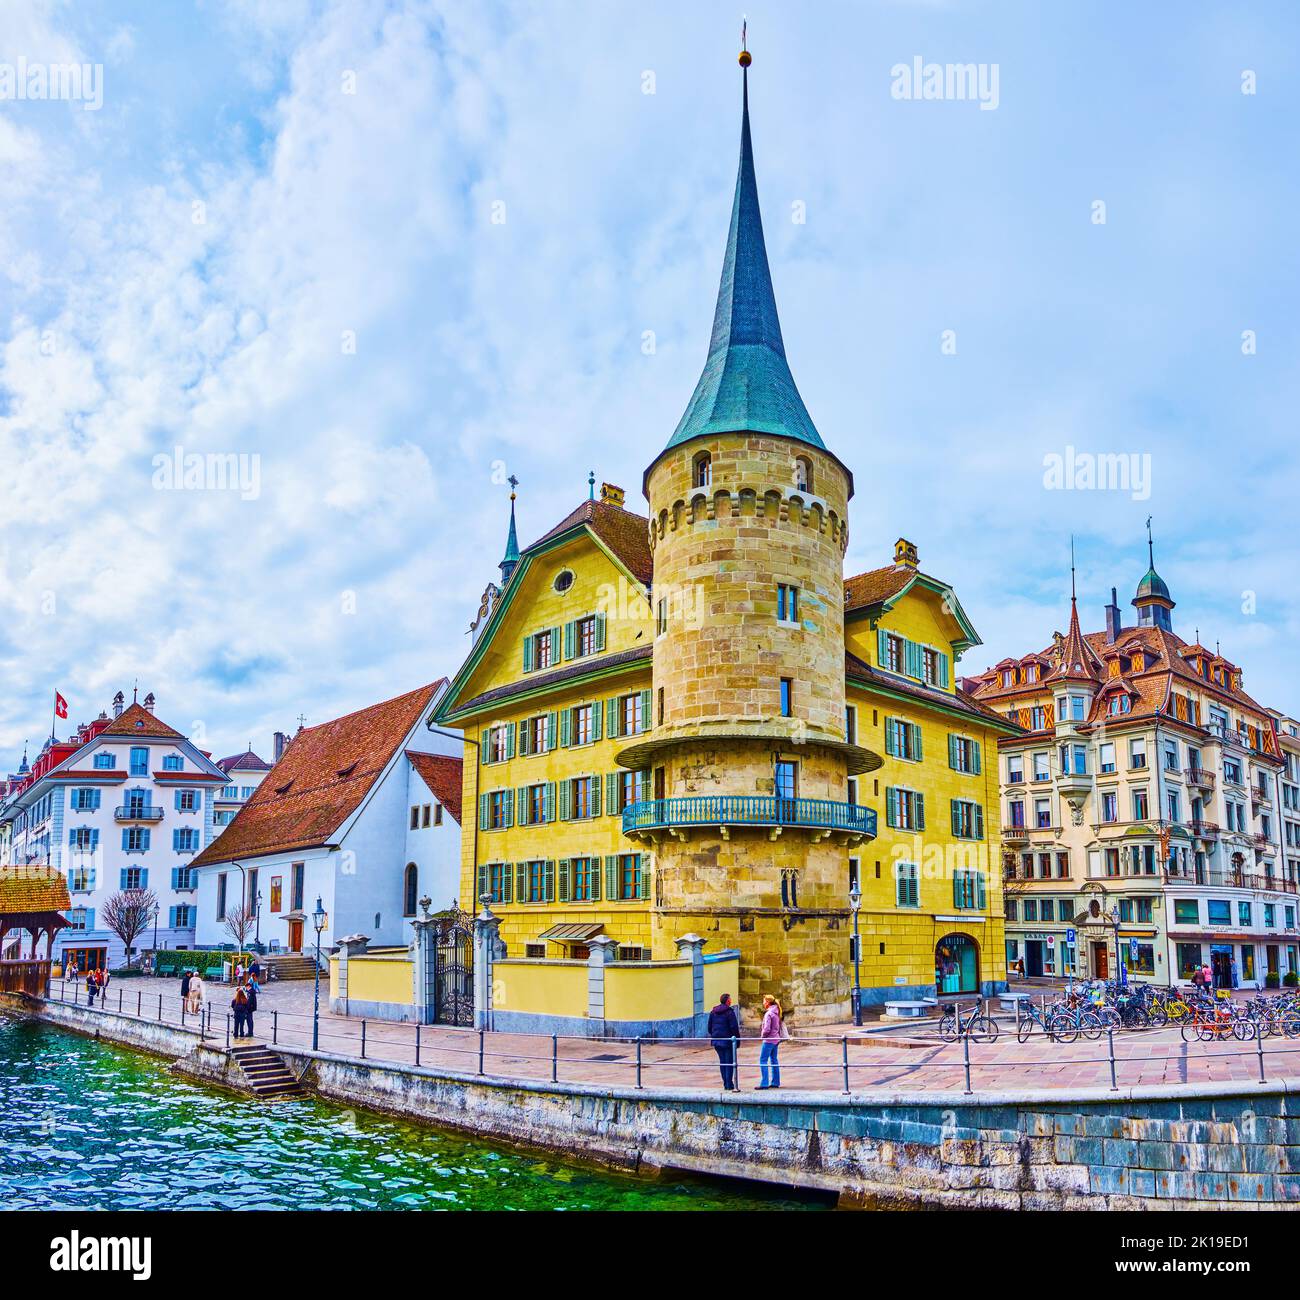 LUCERNE, SWITZERLAND - MARCH 30, 2022: Outstanfing historical building with the tower, nowadays served as a Grieder department store, on March 30 in L Stock Photo